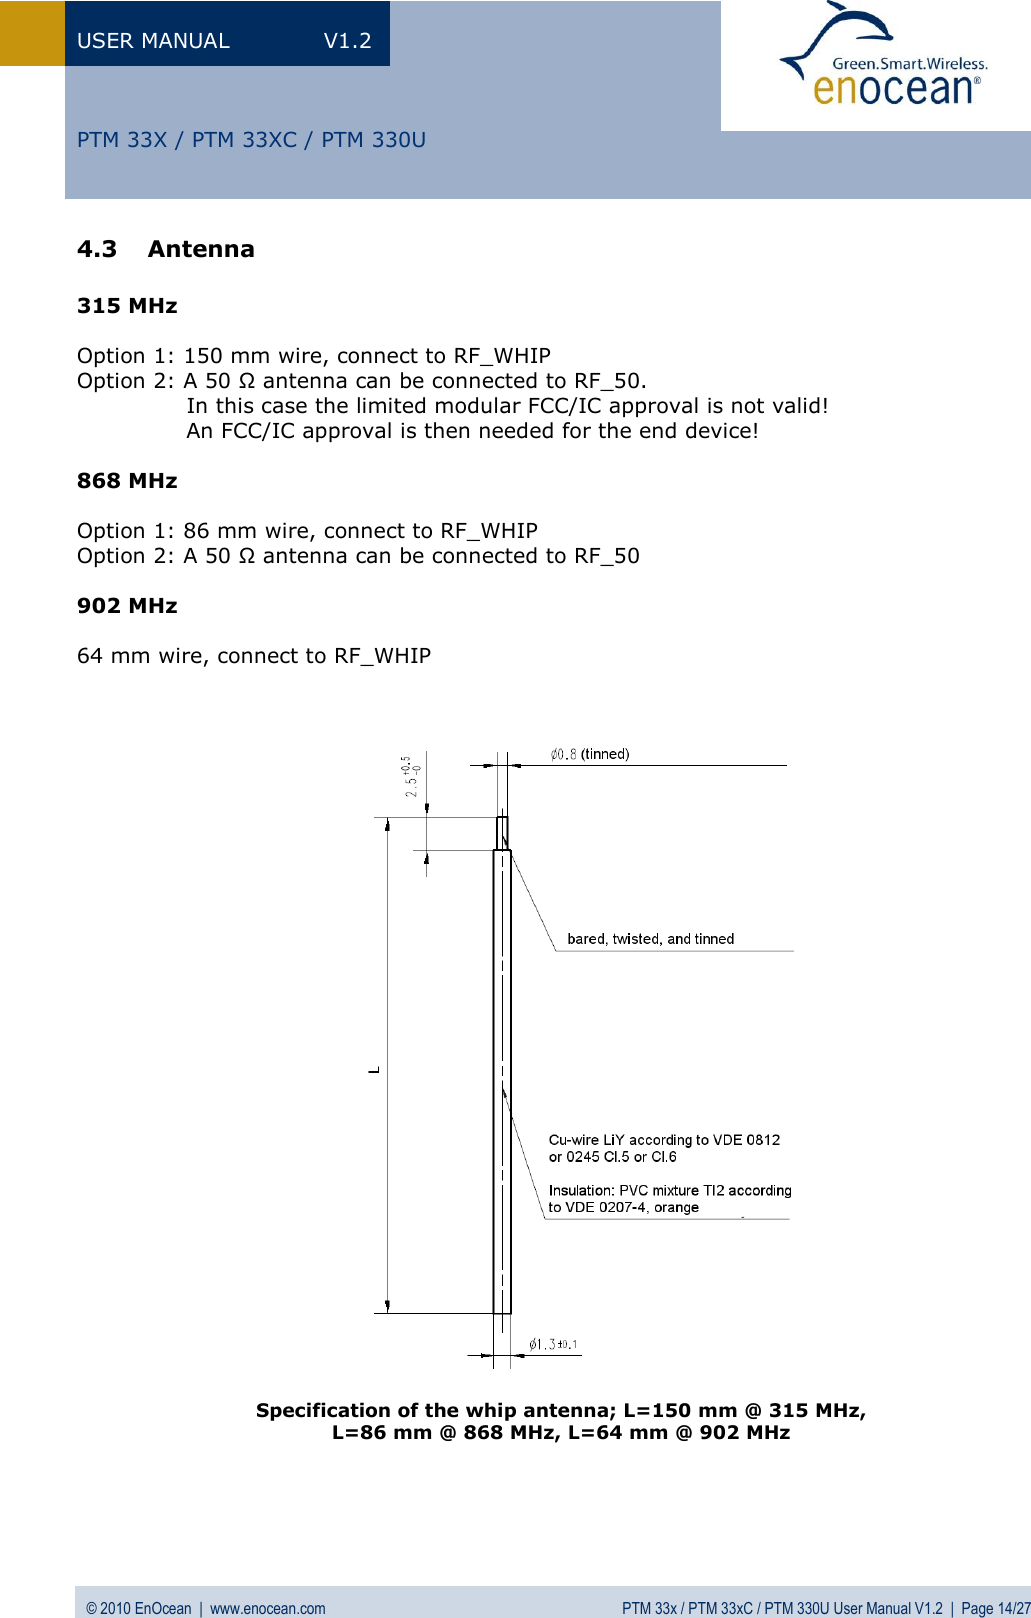 USER MANUAL  V1.2 © 2010 EnOcean  |  www.enocean.com  PTM 33x / PTM 33xC / PTM 330U User Manual V1.2  |  Page 14/27   PTM 33X / PTM 33XC / PTM 330U 4.3 Antenna   315 MHz  Option 1: 150 mm wire, connect to RF_WHIP Option 2: A 50 Ω antenna can be connected to RF_50.                 In this case the limited modular FCC/IC approval is not valid!                An FCC/IC approval is then needed for the end device!  868 MHz  Option 1: 86 mm wire, connect to RF_WHIP Option 2: A 50 Ω antenna can be connected to RF_50  902 MHz  64 mm wire, connect to RF_WHIP      Specification of the whip antenna; L=150 mm @ 315 MHz,  L=86 mm @ 868 MHz, L=64 mm @ 902 MHz 